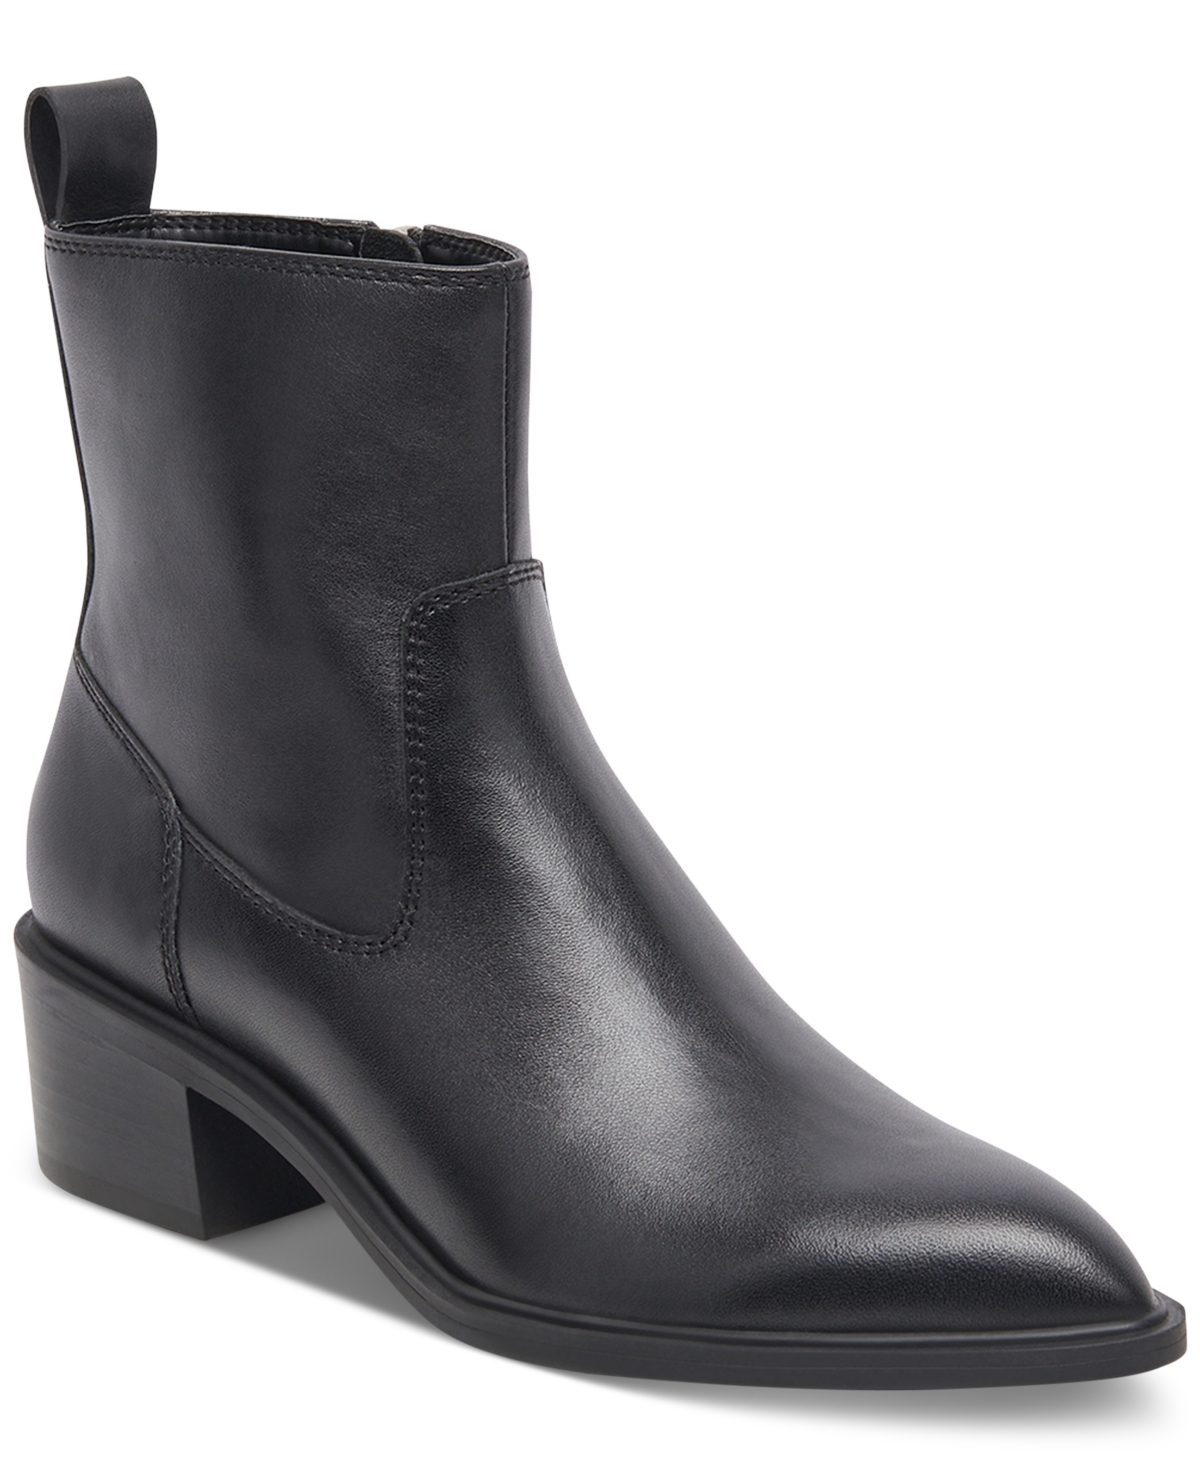 DOLCE VITA WOMEN'S BILI H2O POINTED-TOE TAILORED BOOTIES